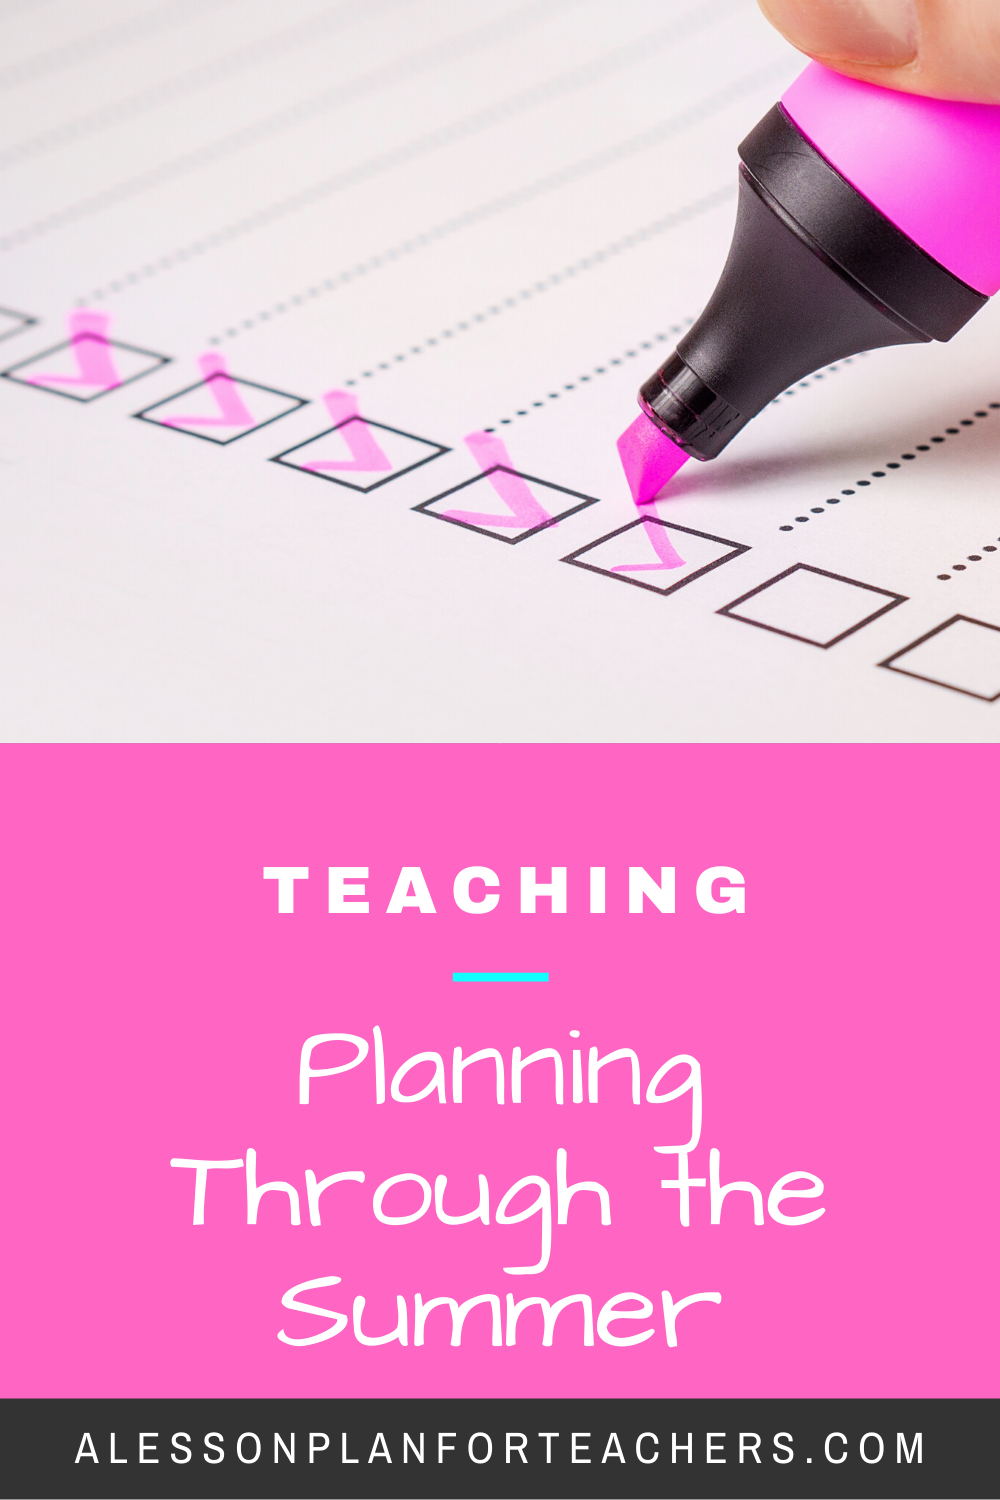 By starting your planning during the summer and developing a foolproof plan for next school year, you will prevent a lot of stress and sleepless nights in the fall! #teacherplanning #summerbreak #curriculummap #classroommanagement